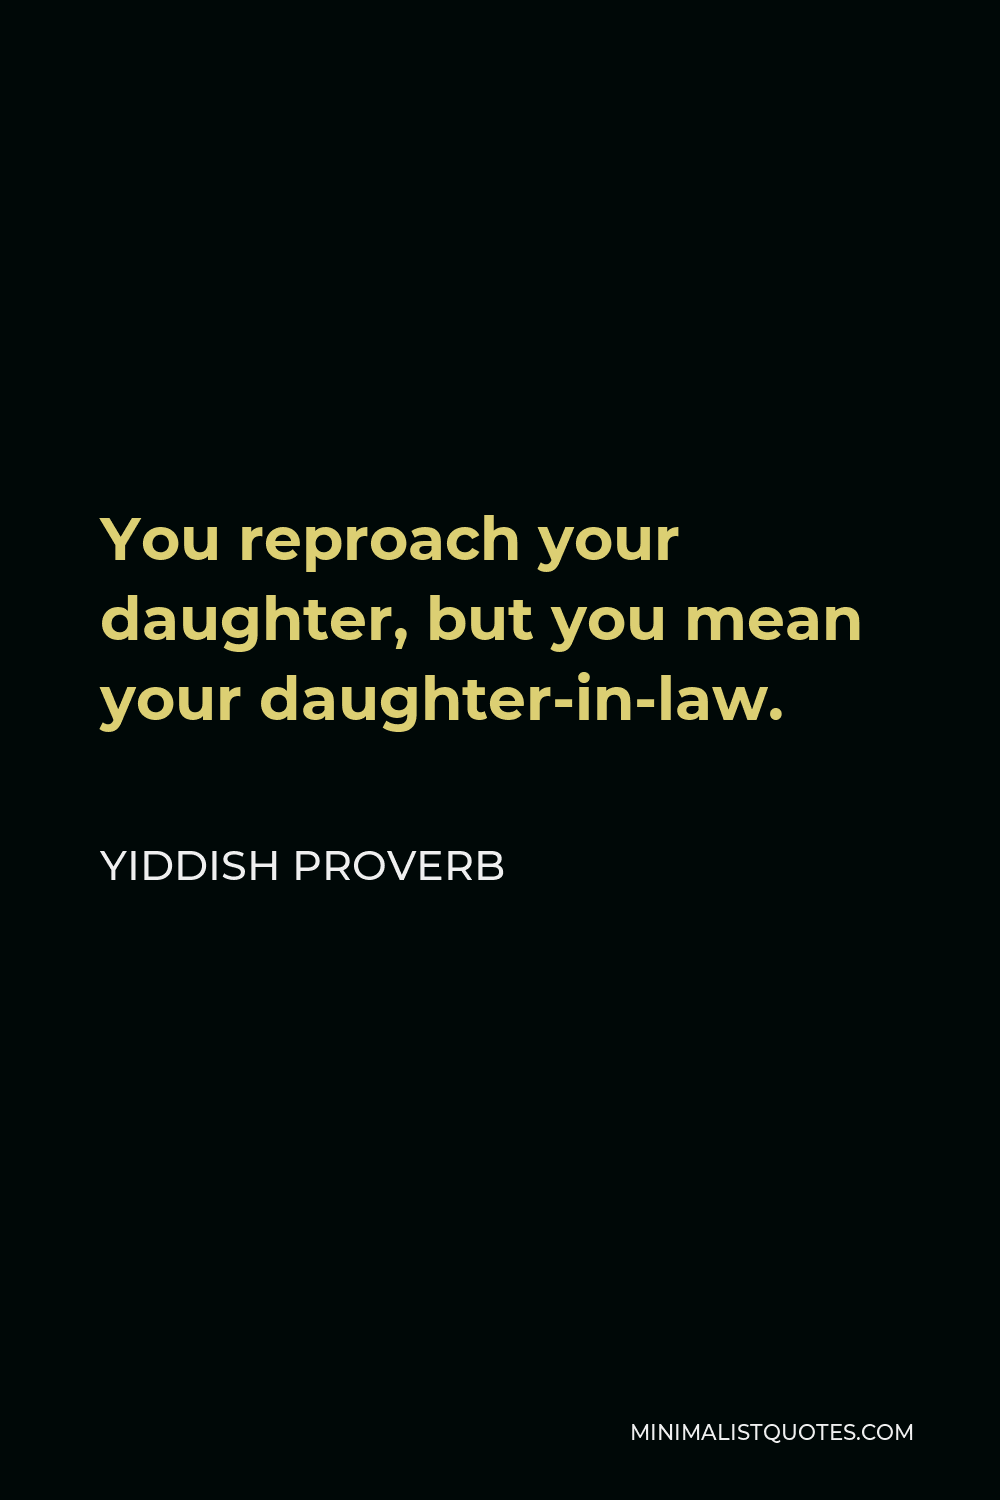 Yiddish Proverb Quote - You reproach your daughter, but you mean your daughter-in-law.